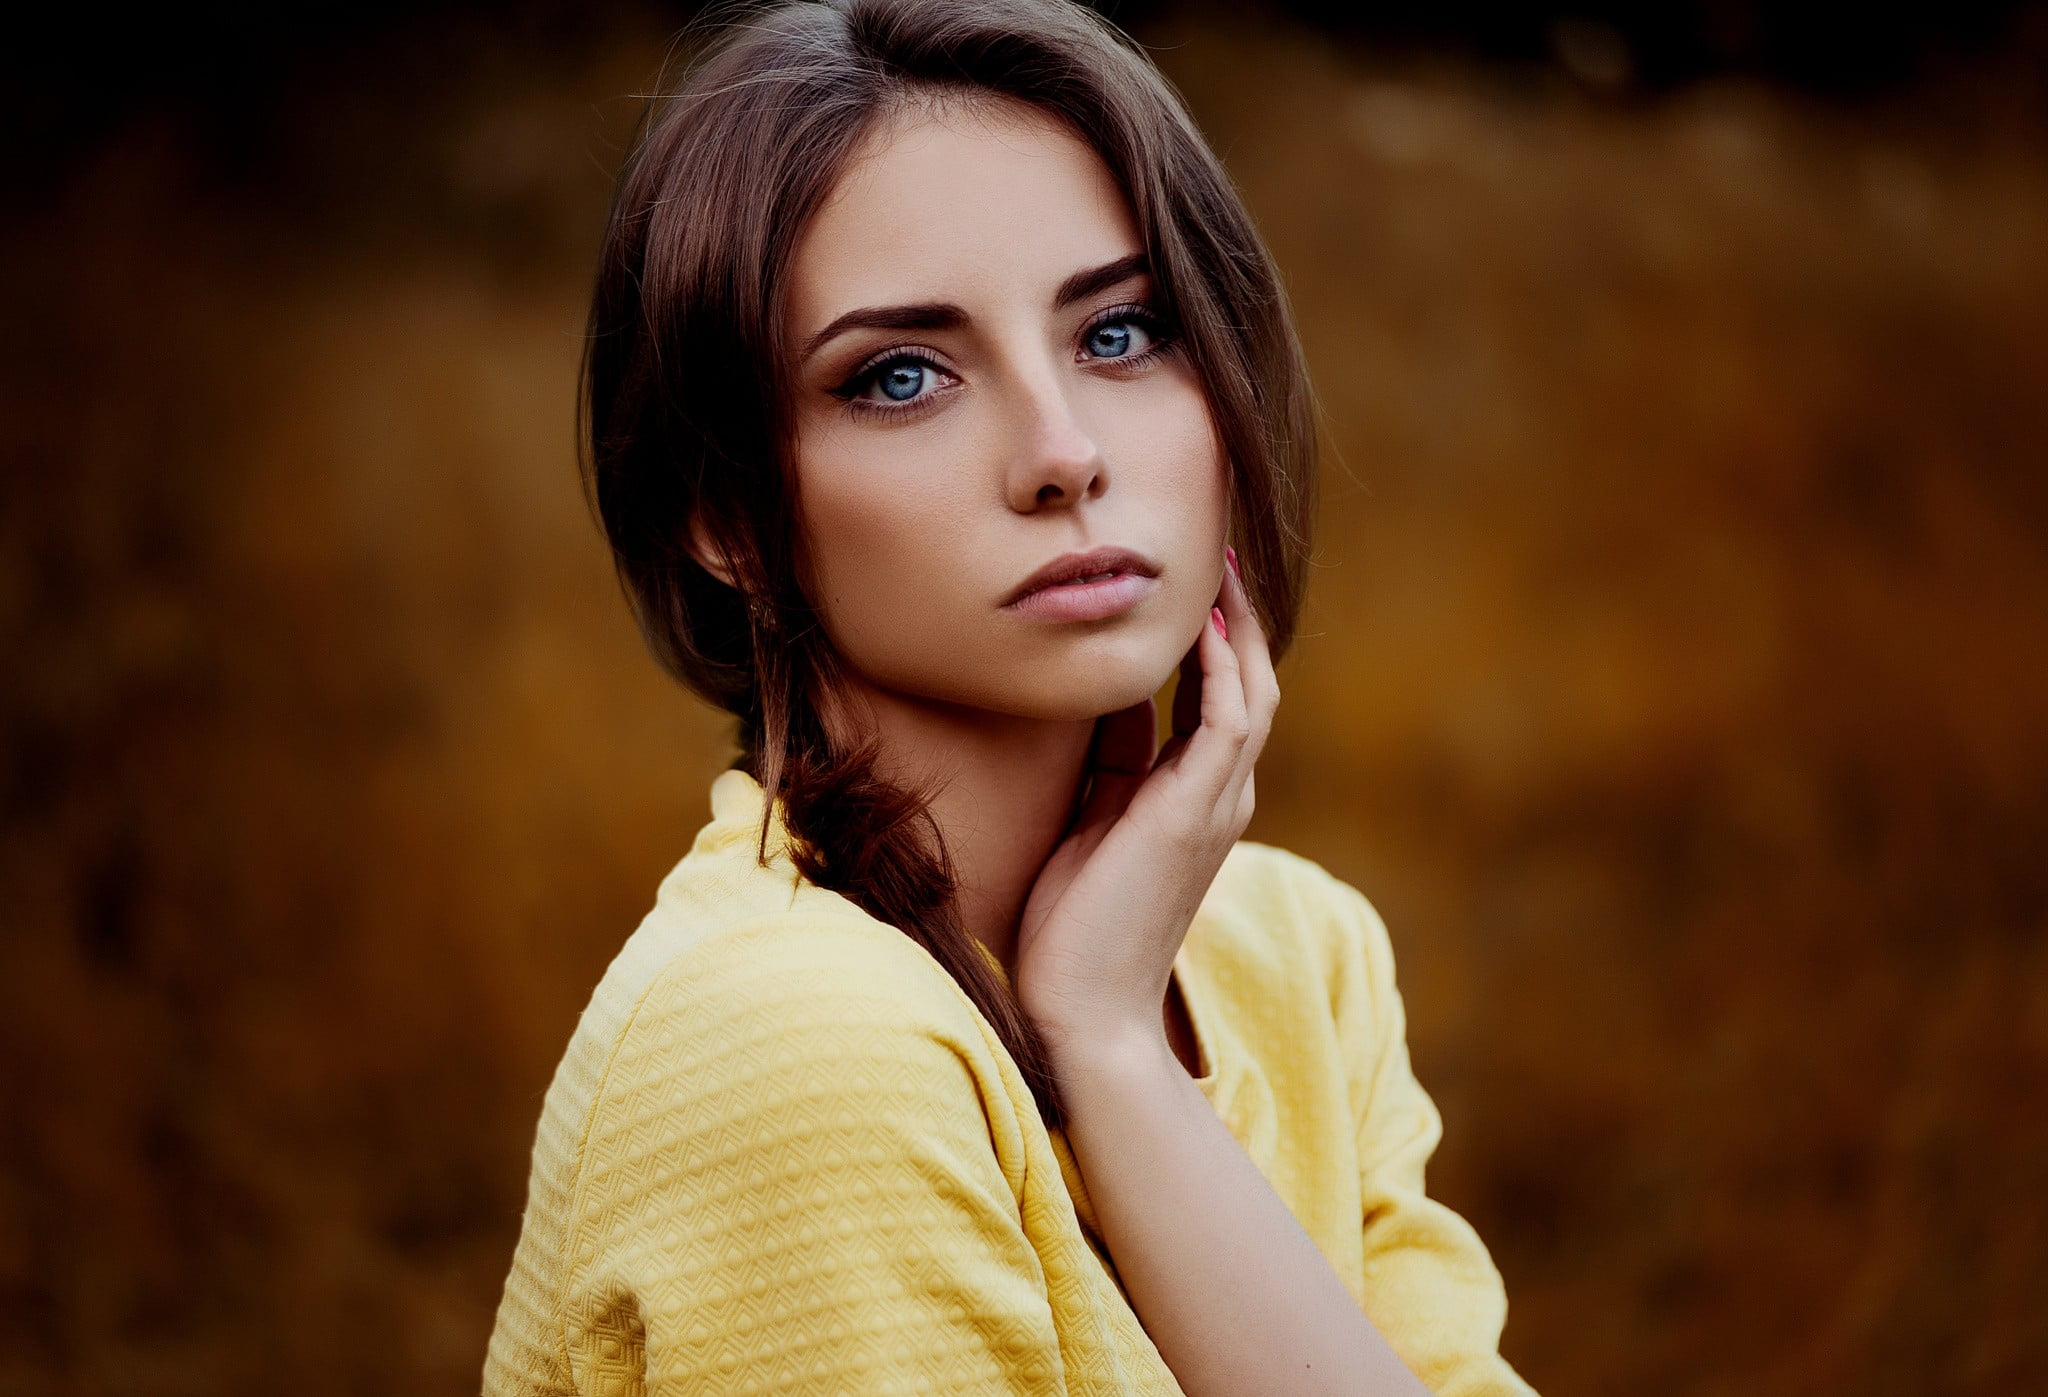 Beauty Portrait with Blue Eyes and Short Hair - wide 8